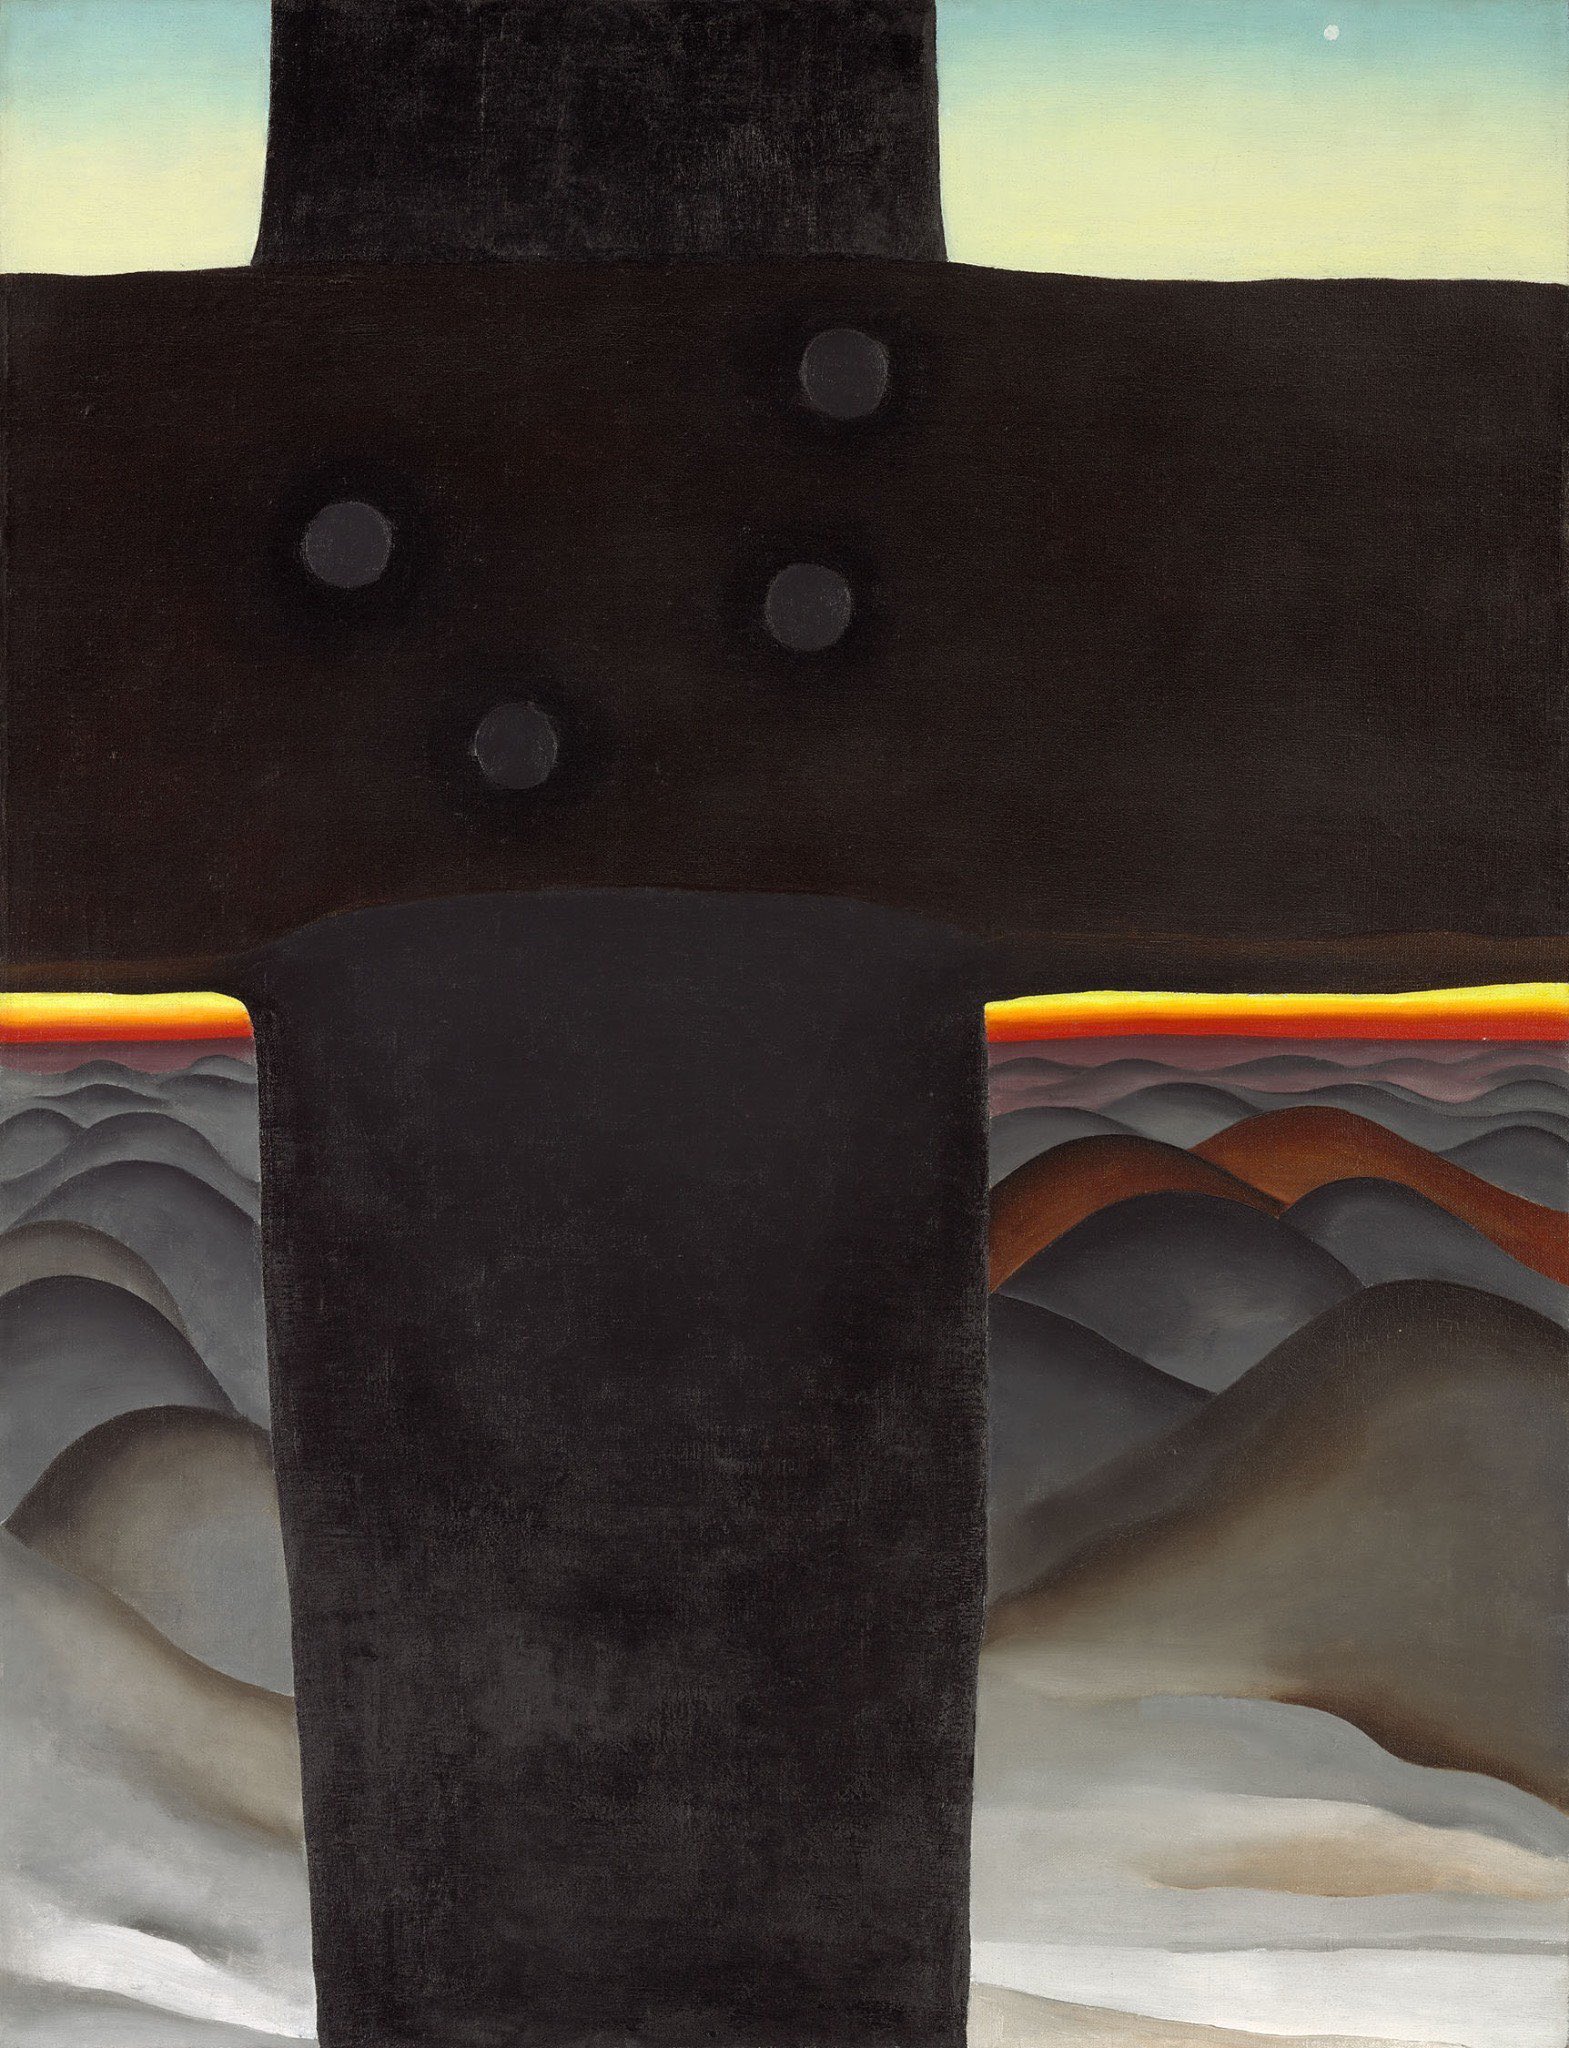 Georgia O'Keeffe. Black Cross, New Mexico. 1929. Source: Art Institute of Chicago